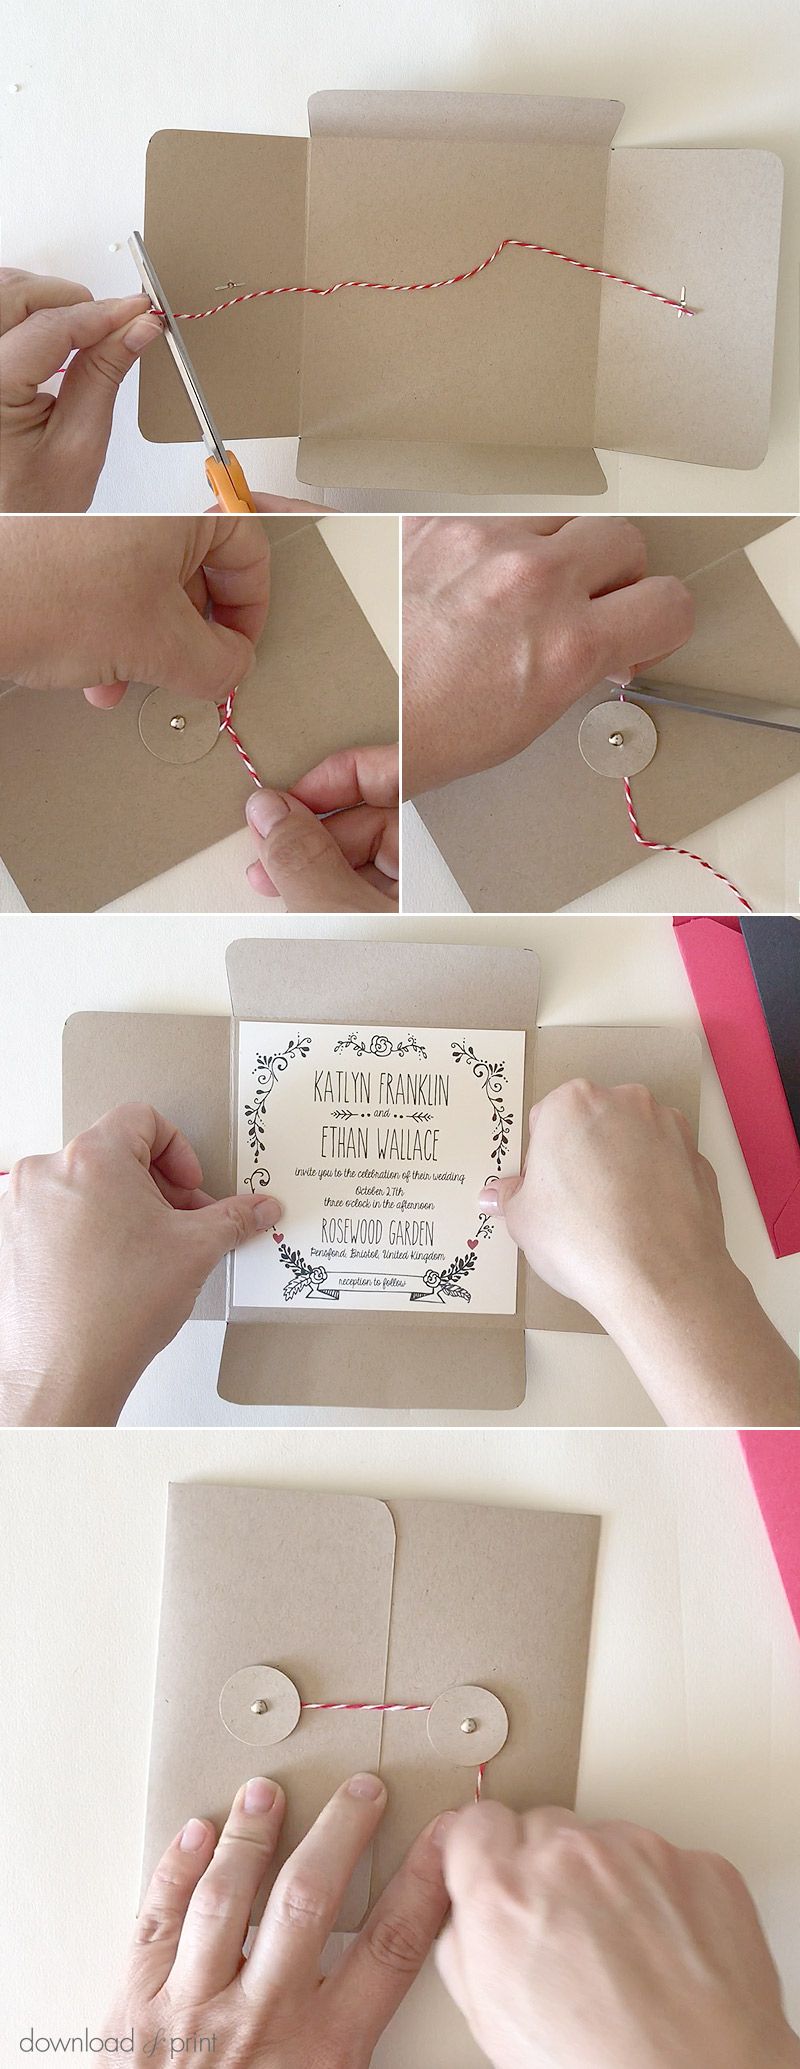 DIY wedding pocket invitation with string and button closure | Download & Print